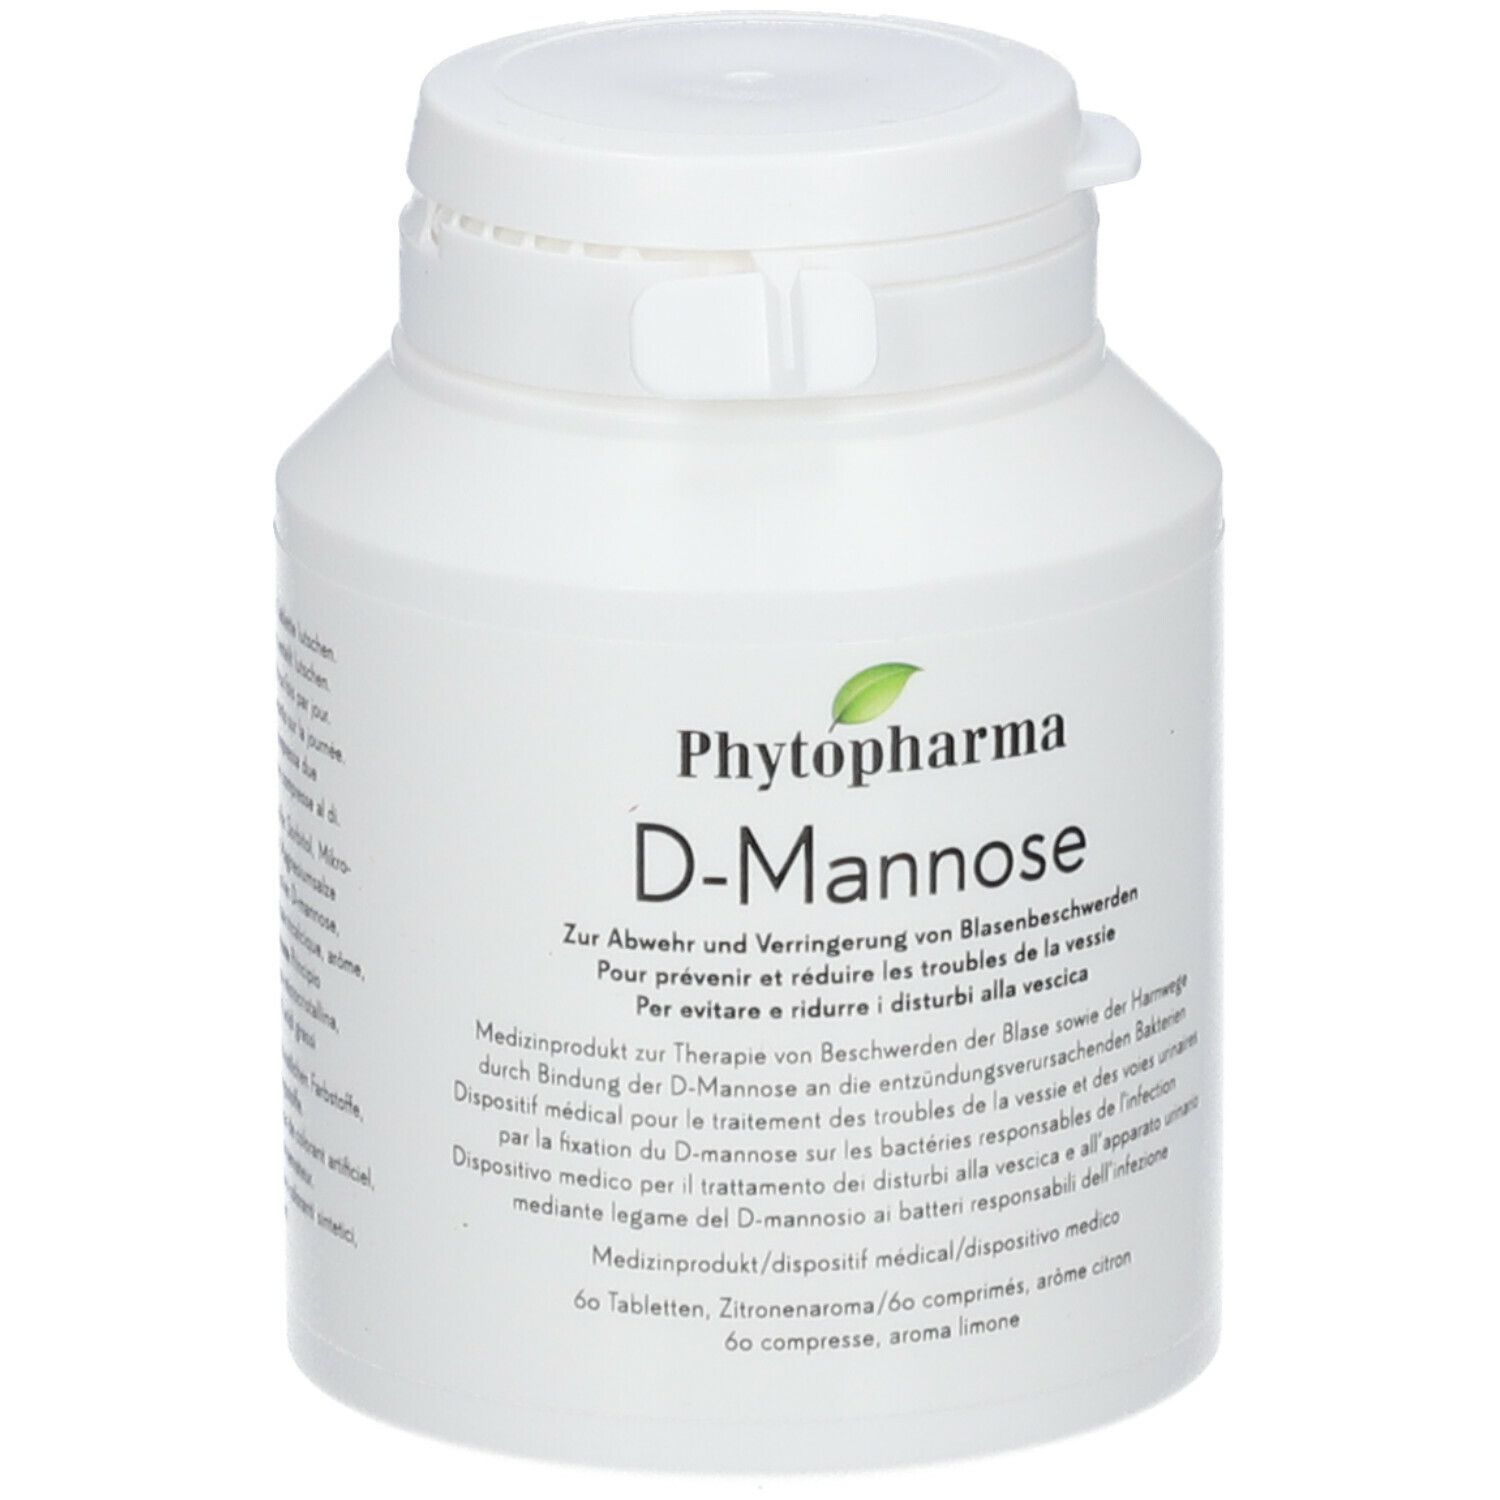 Phytopharma D-Mannose